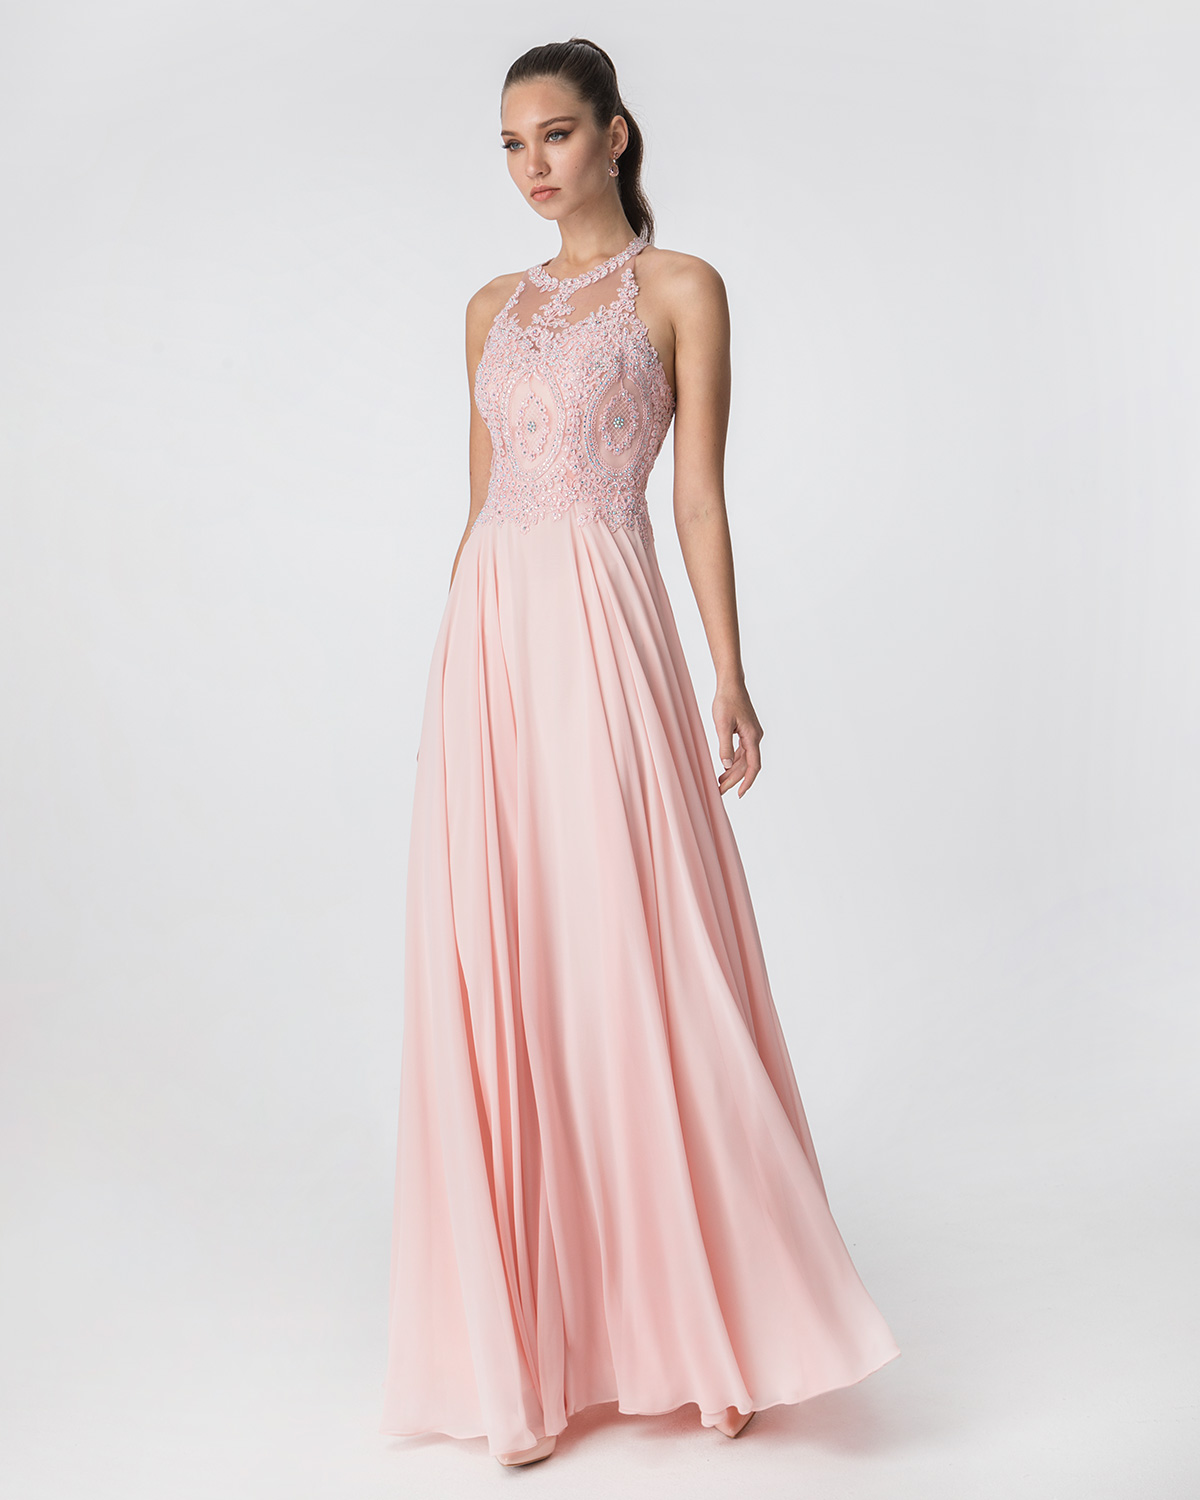 Cocktail Dresses / Cocktail long dress with beaded top and chiffon skirt